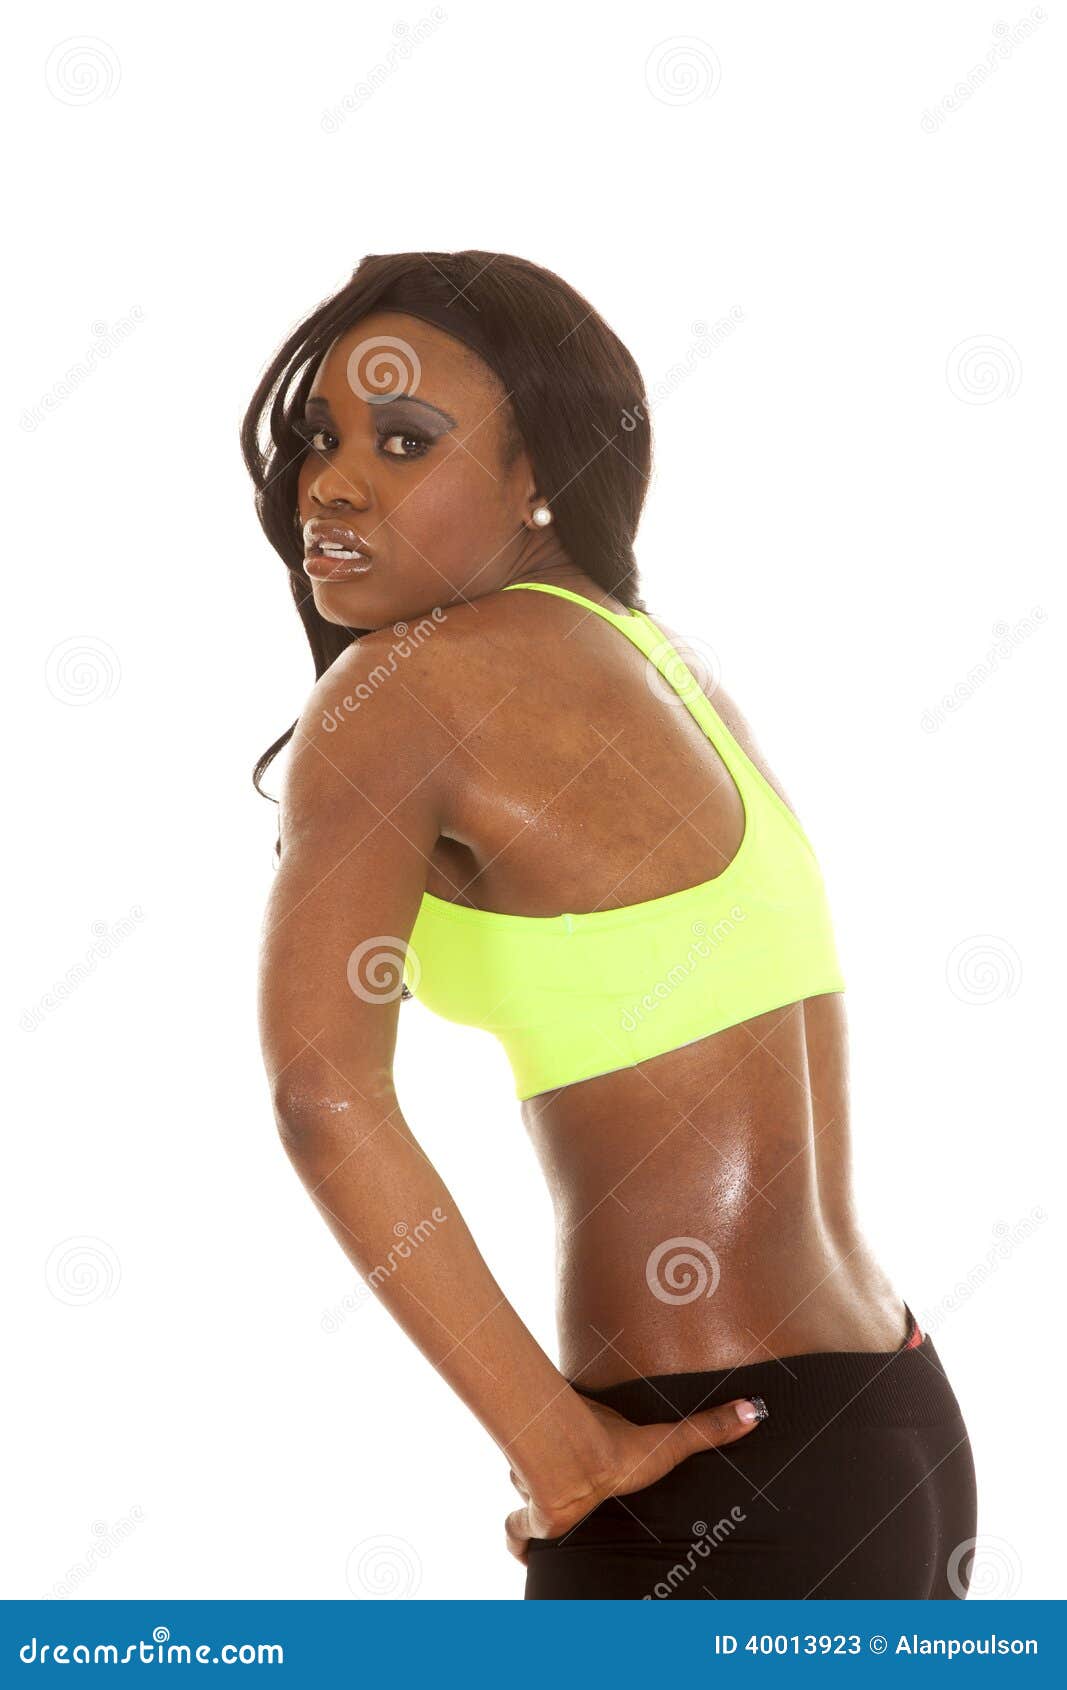 African American Woman Fitness Black Upper Body Side Stock Image - Image of  flexing, dark: 60558273